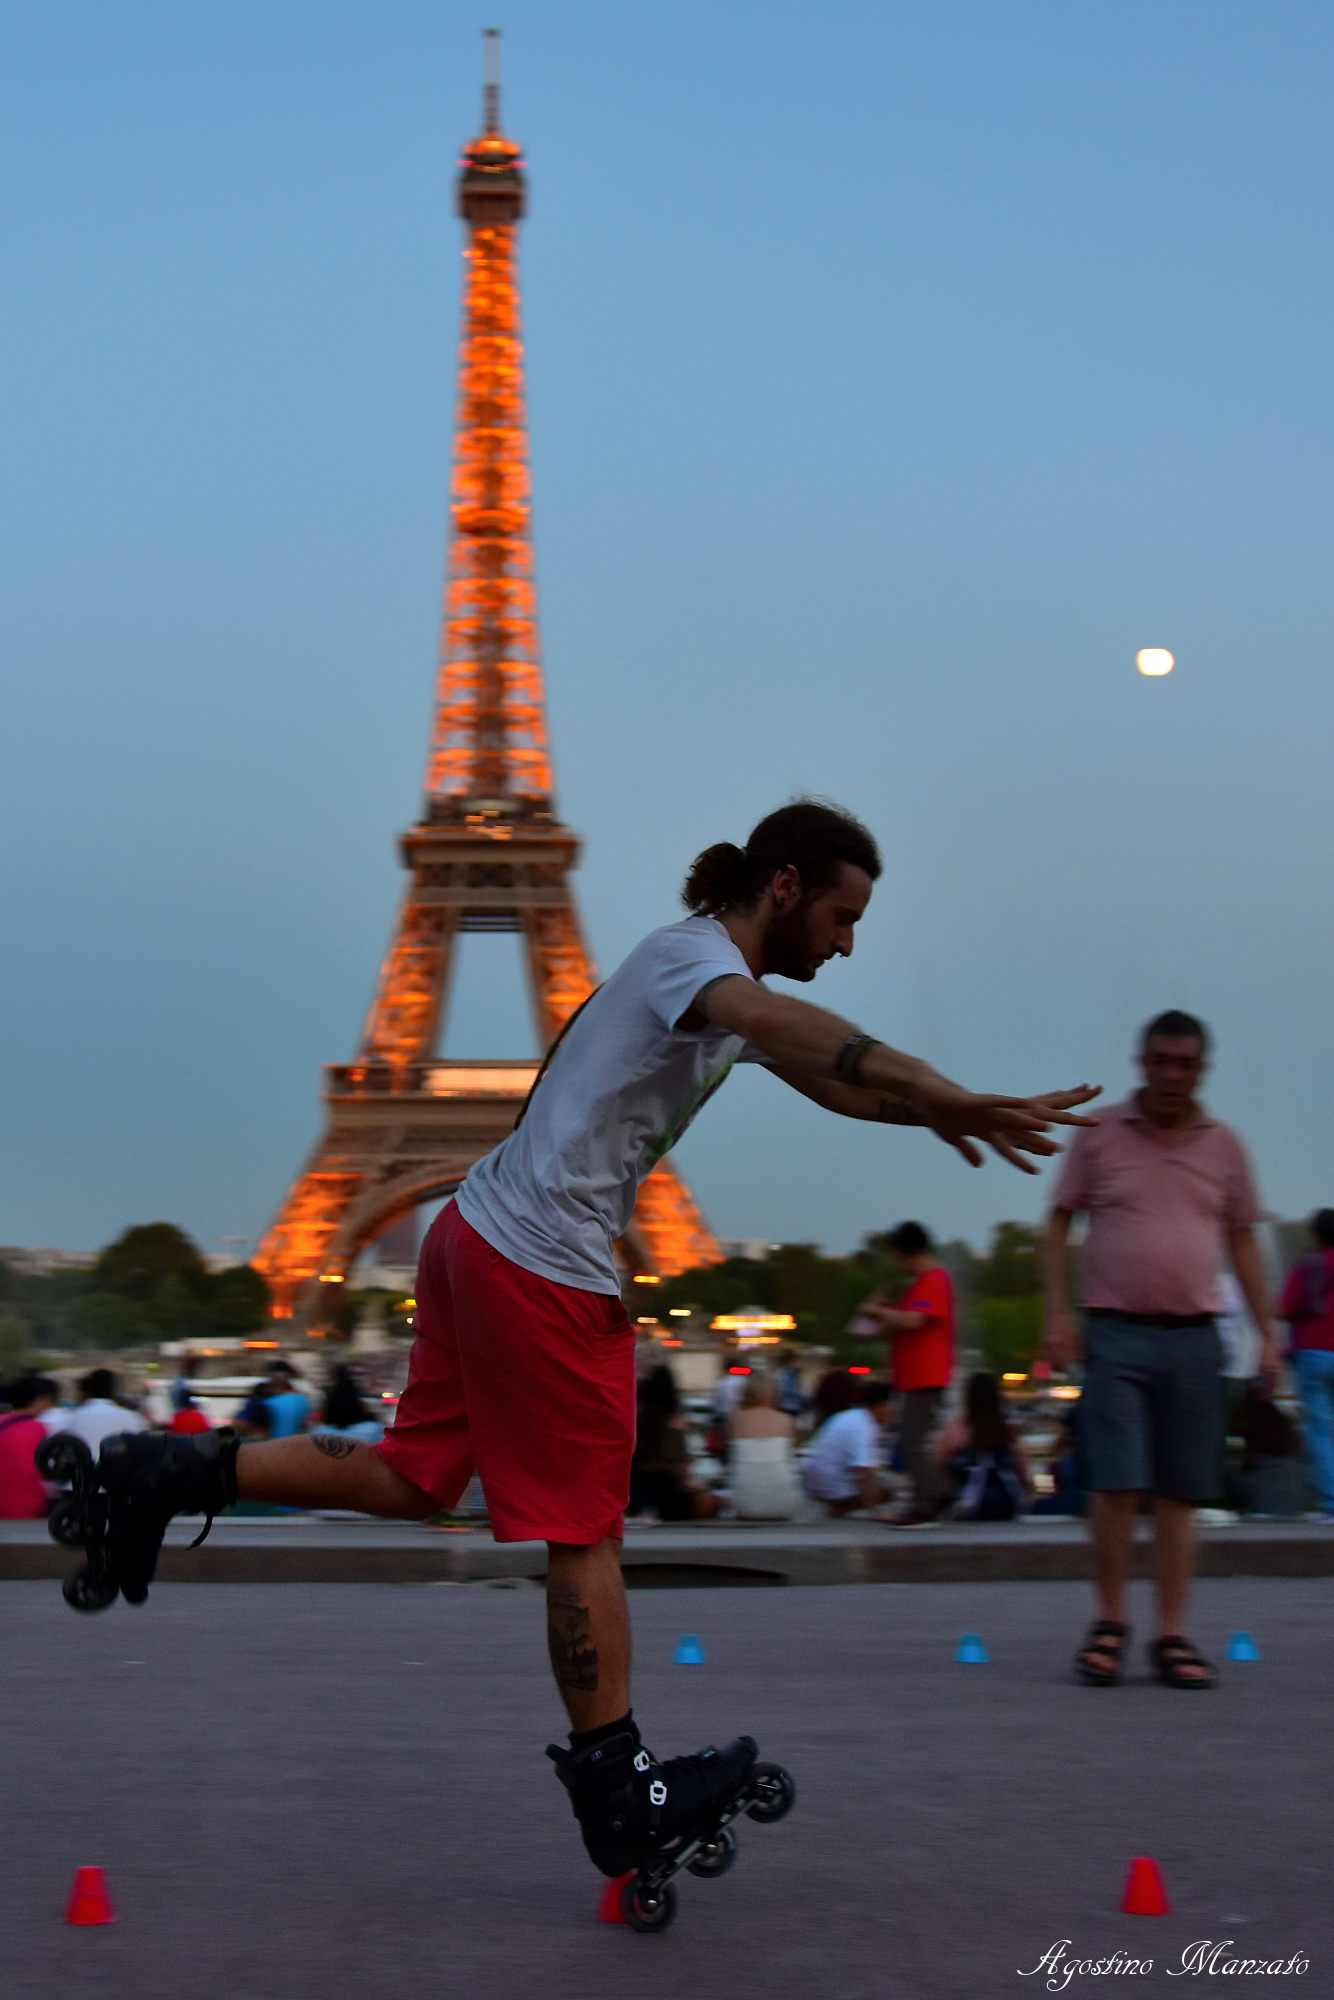 Equilibrisms in front of the Eiffel Tower...